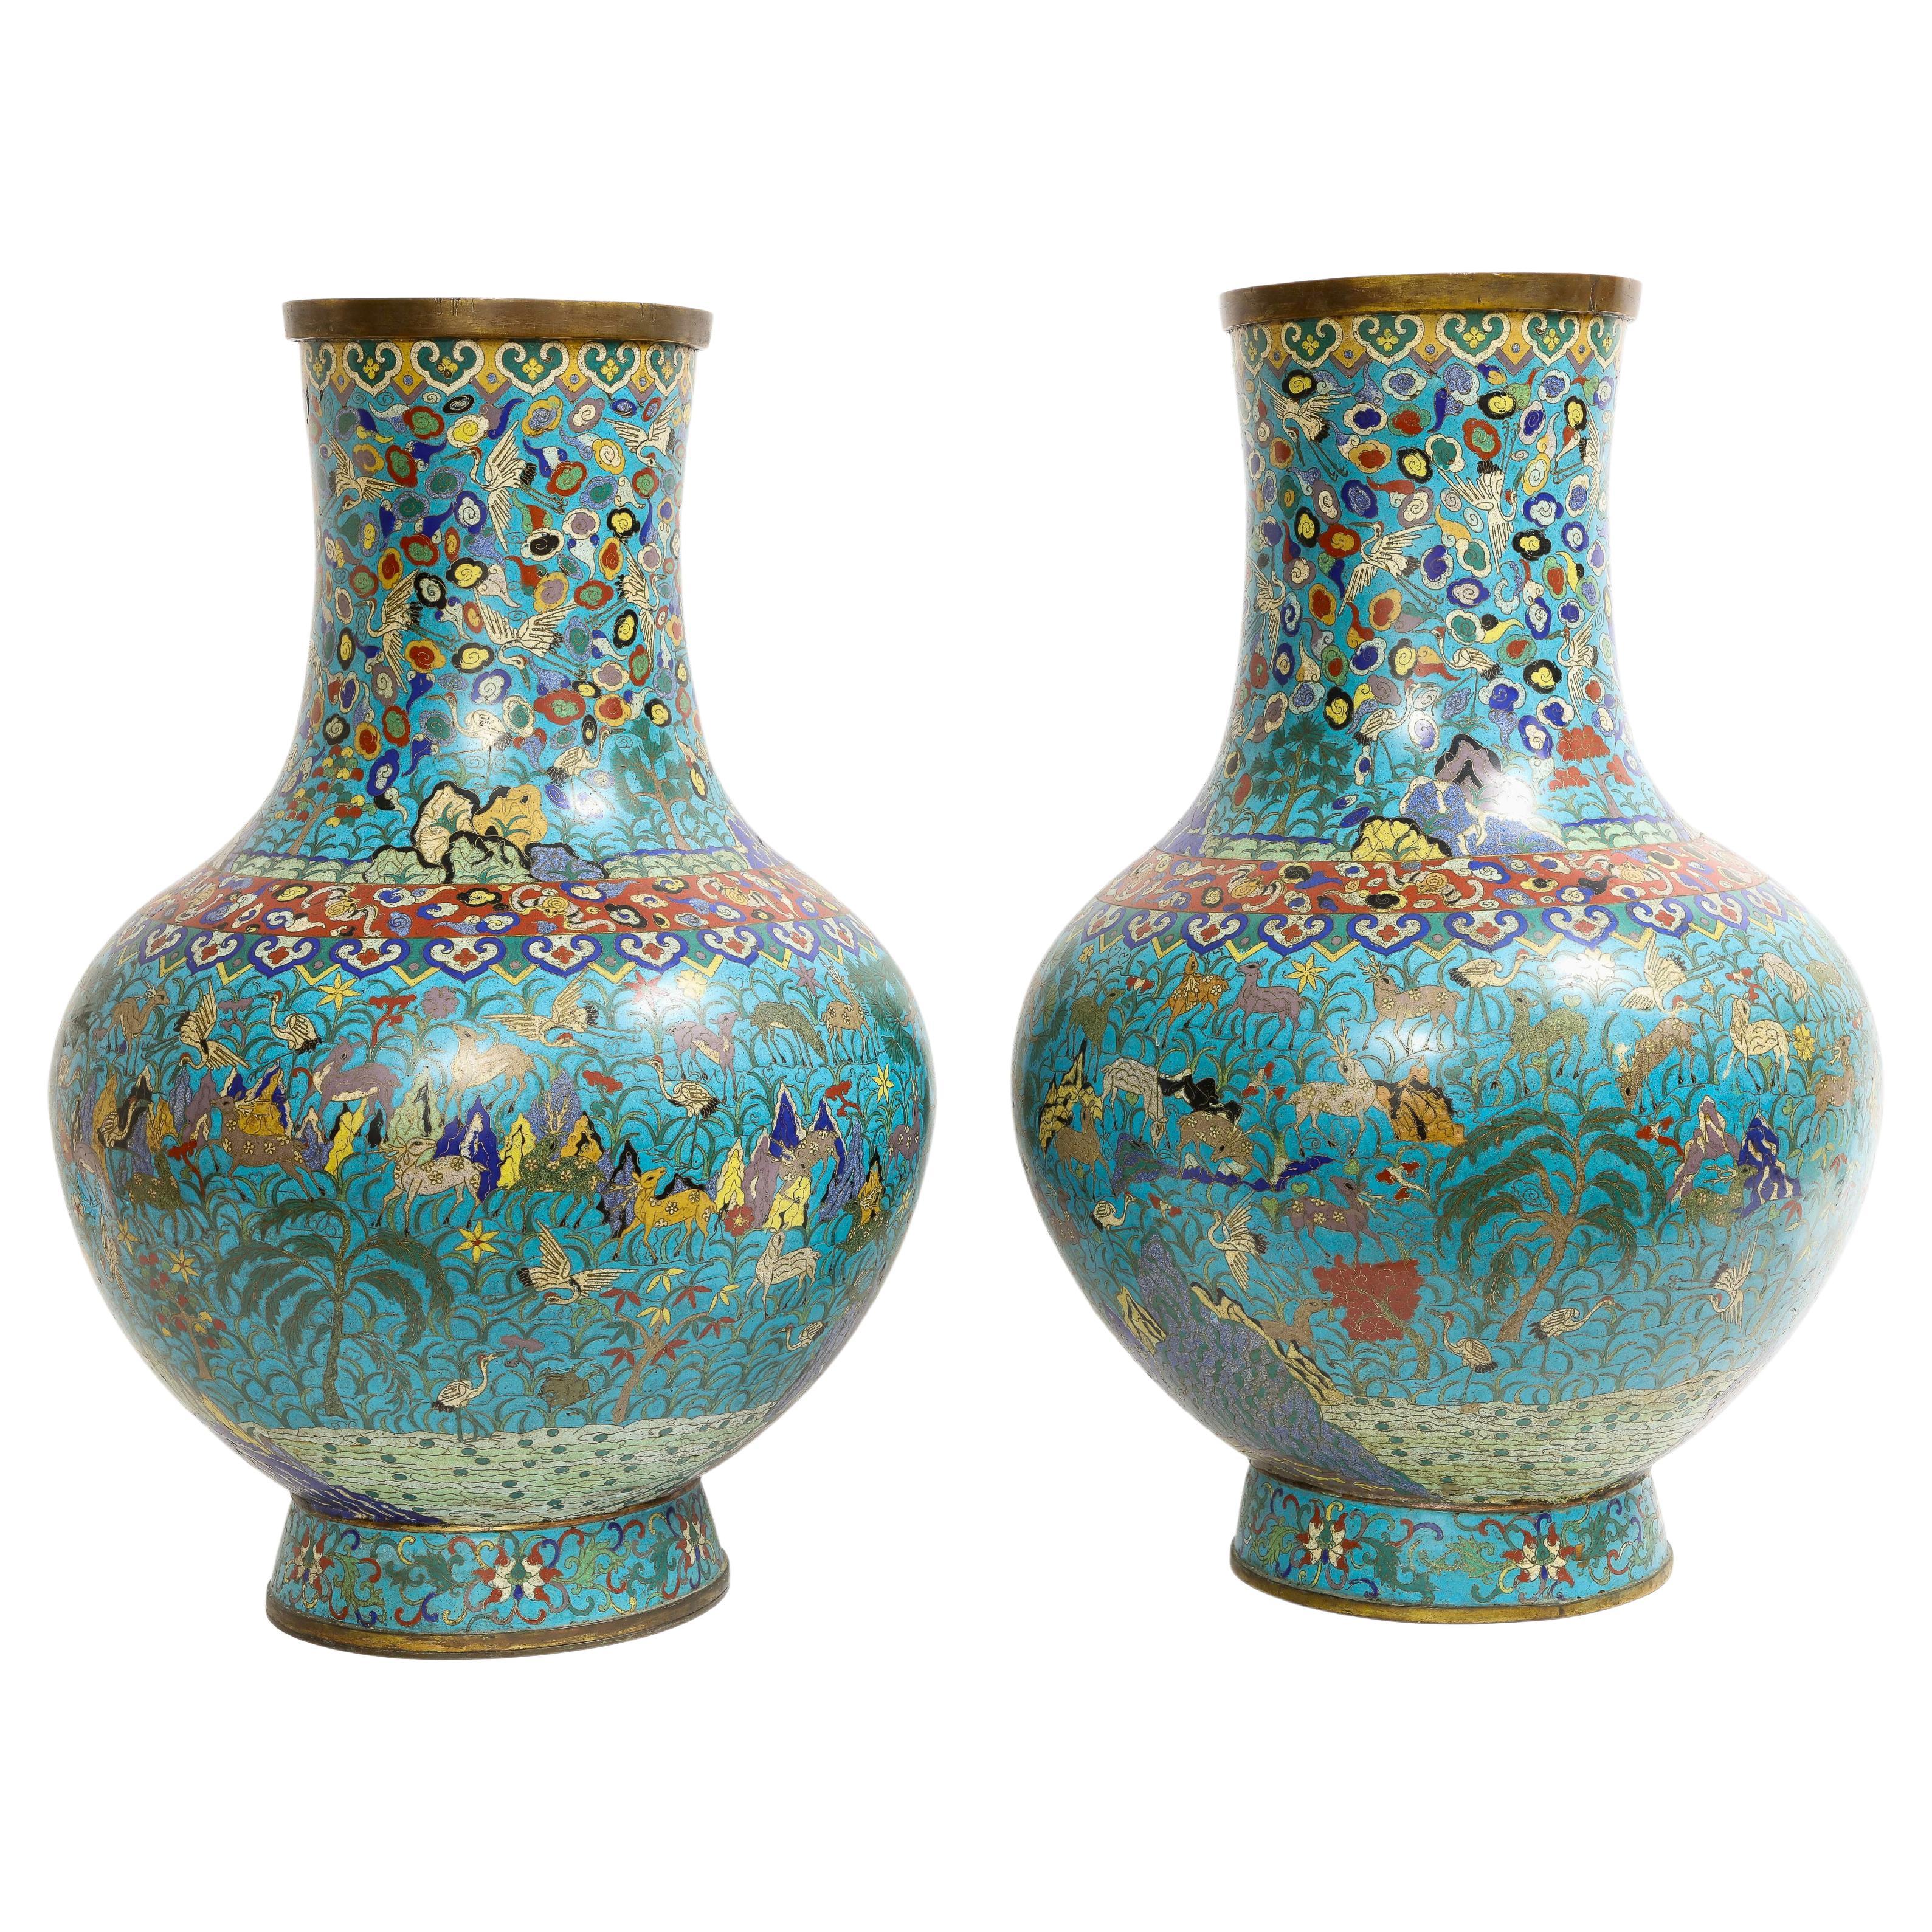 Massive Pair of 19th C. Chinese Cloisonne Enamel Vases with Deer Decoration